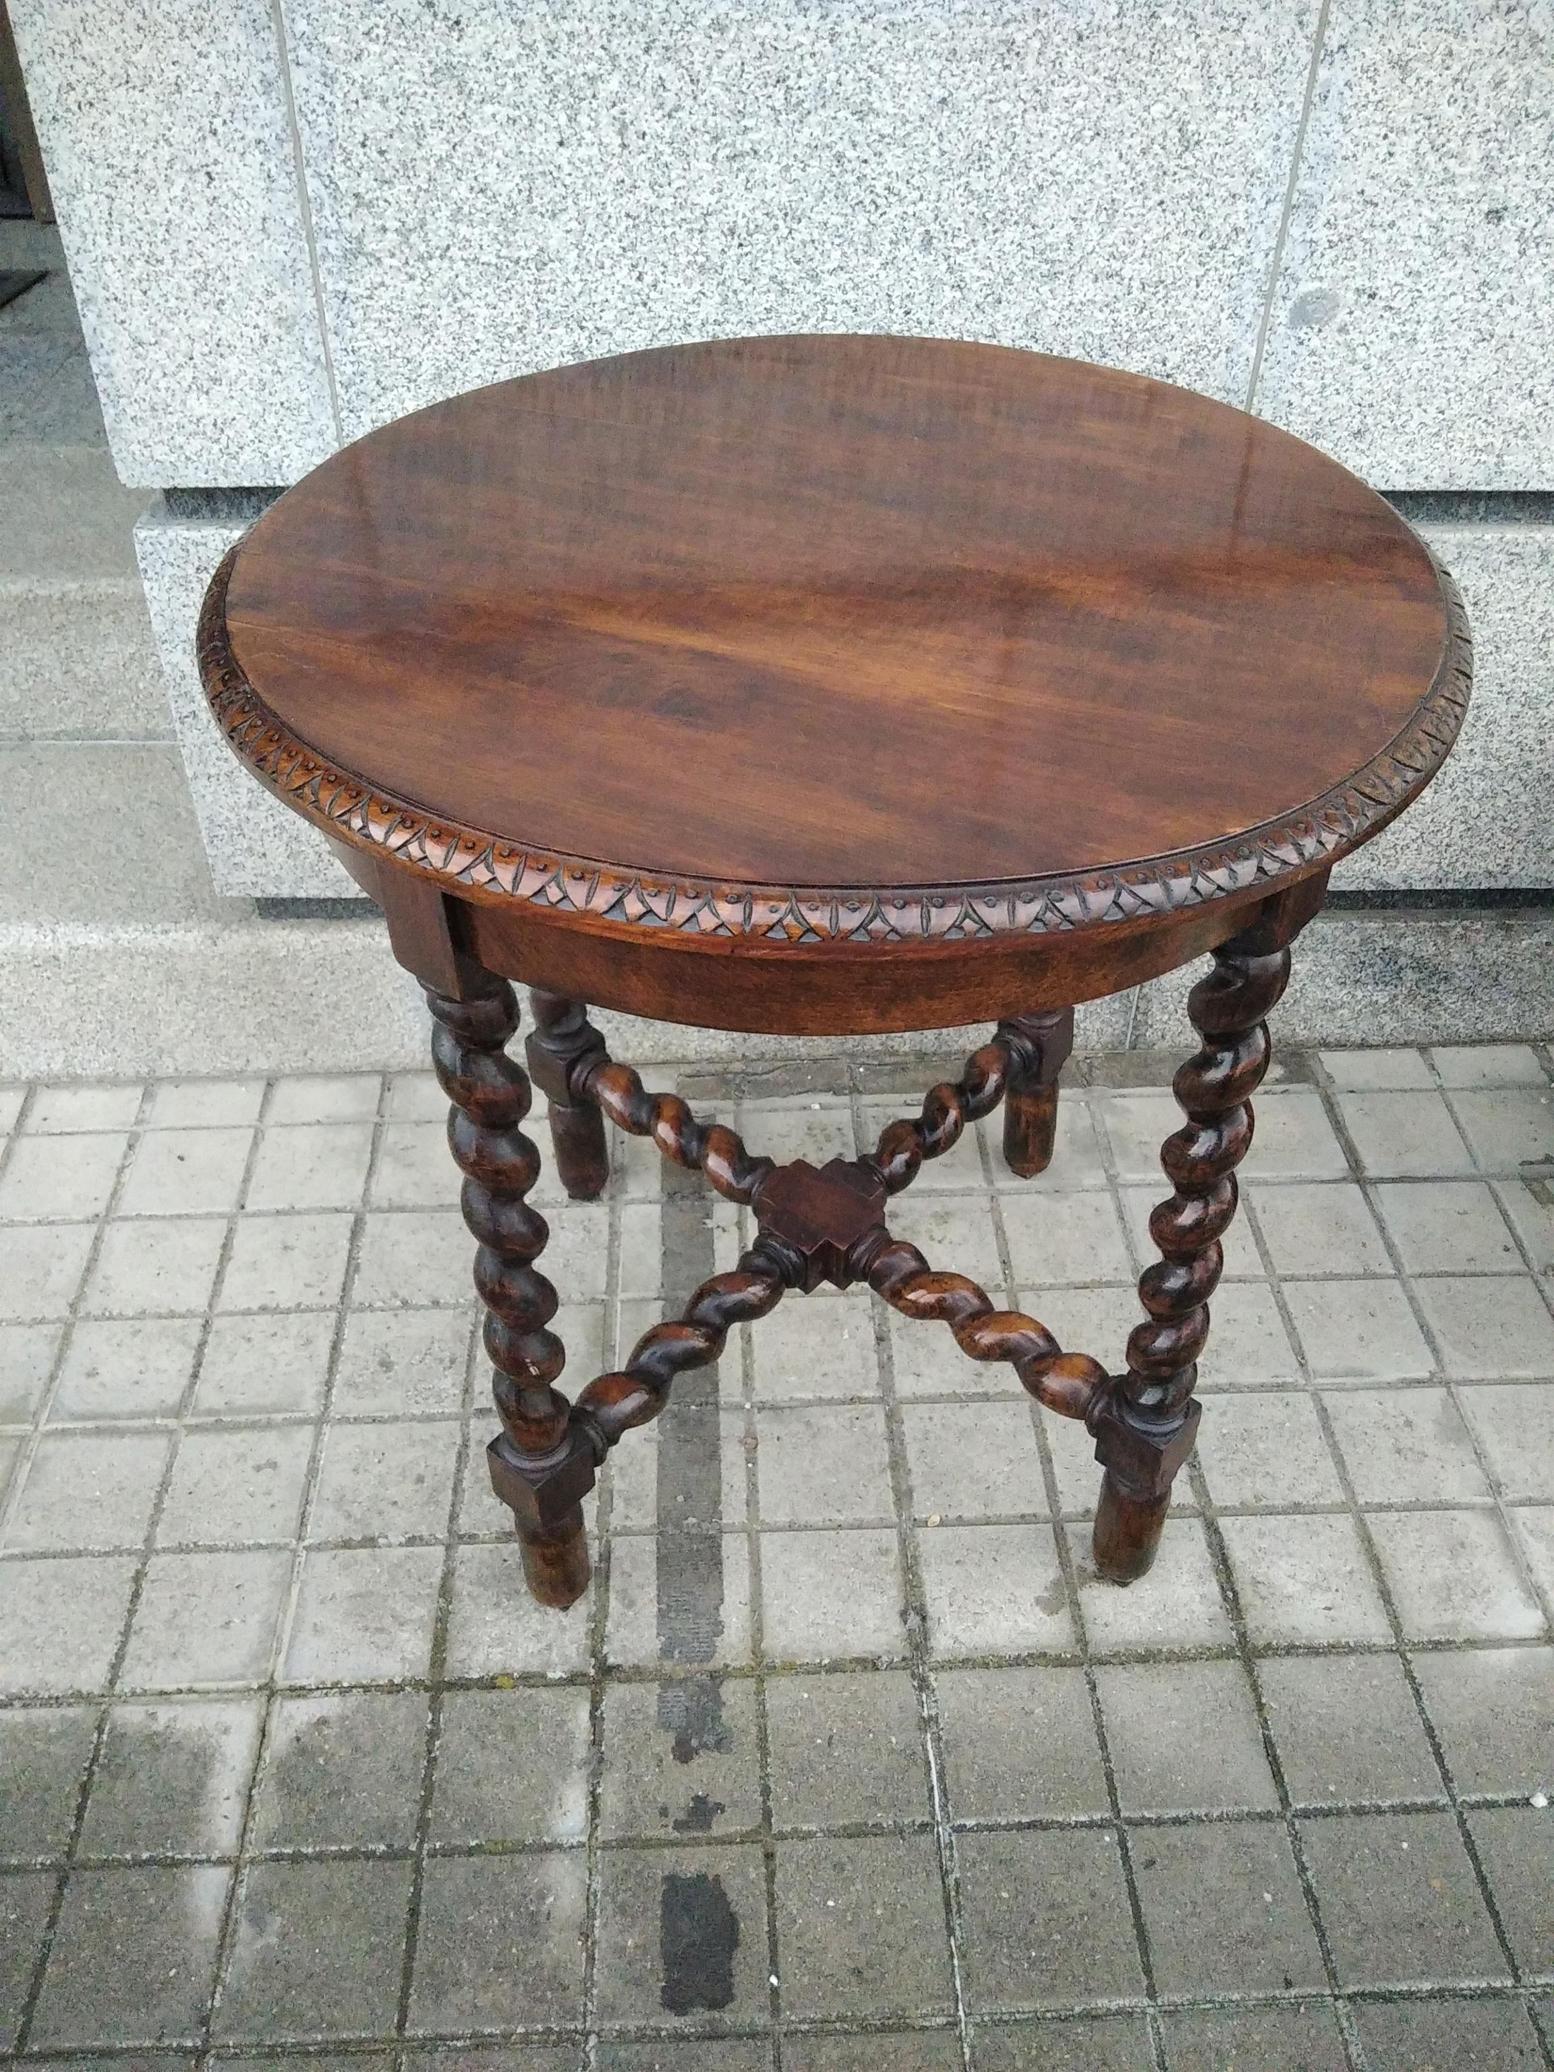                                *We have another one just like it. Consult

Beautiful  Side or end table, In perfect condition. Very well cared for

Lovely Round side table features barley twist legs, 19th Century

This table is raised on a base